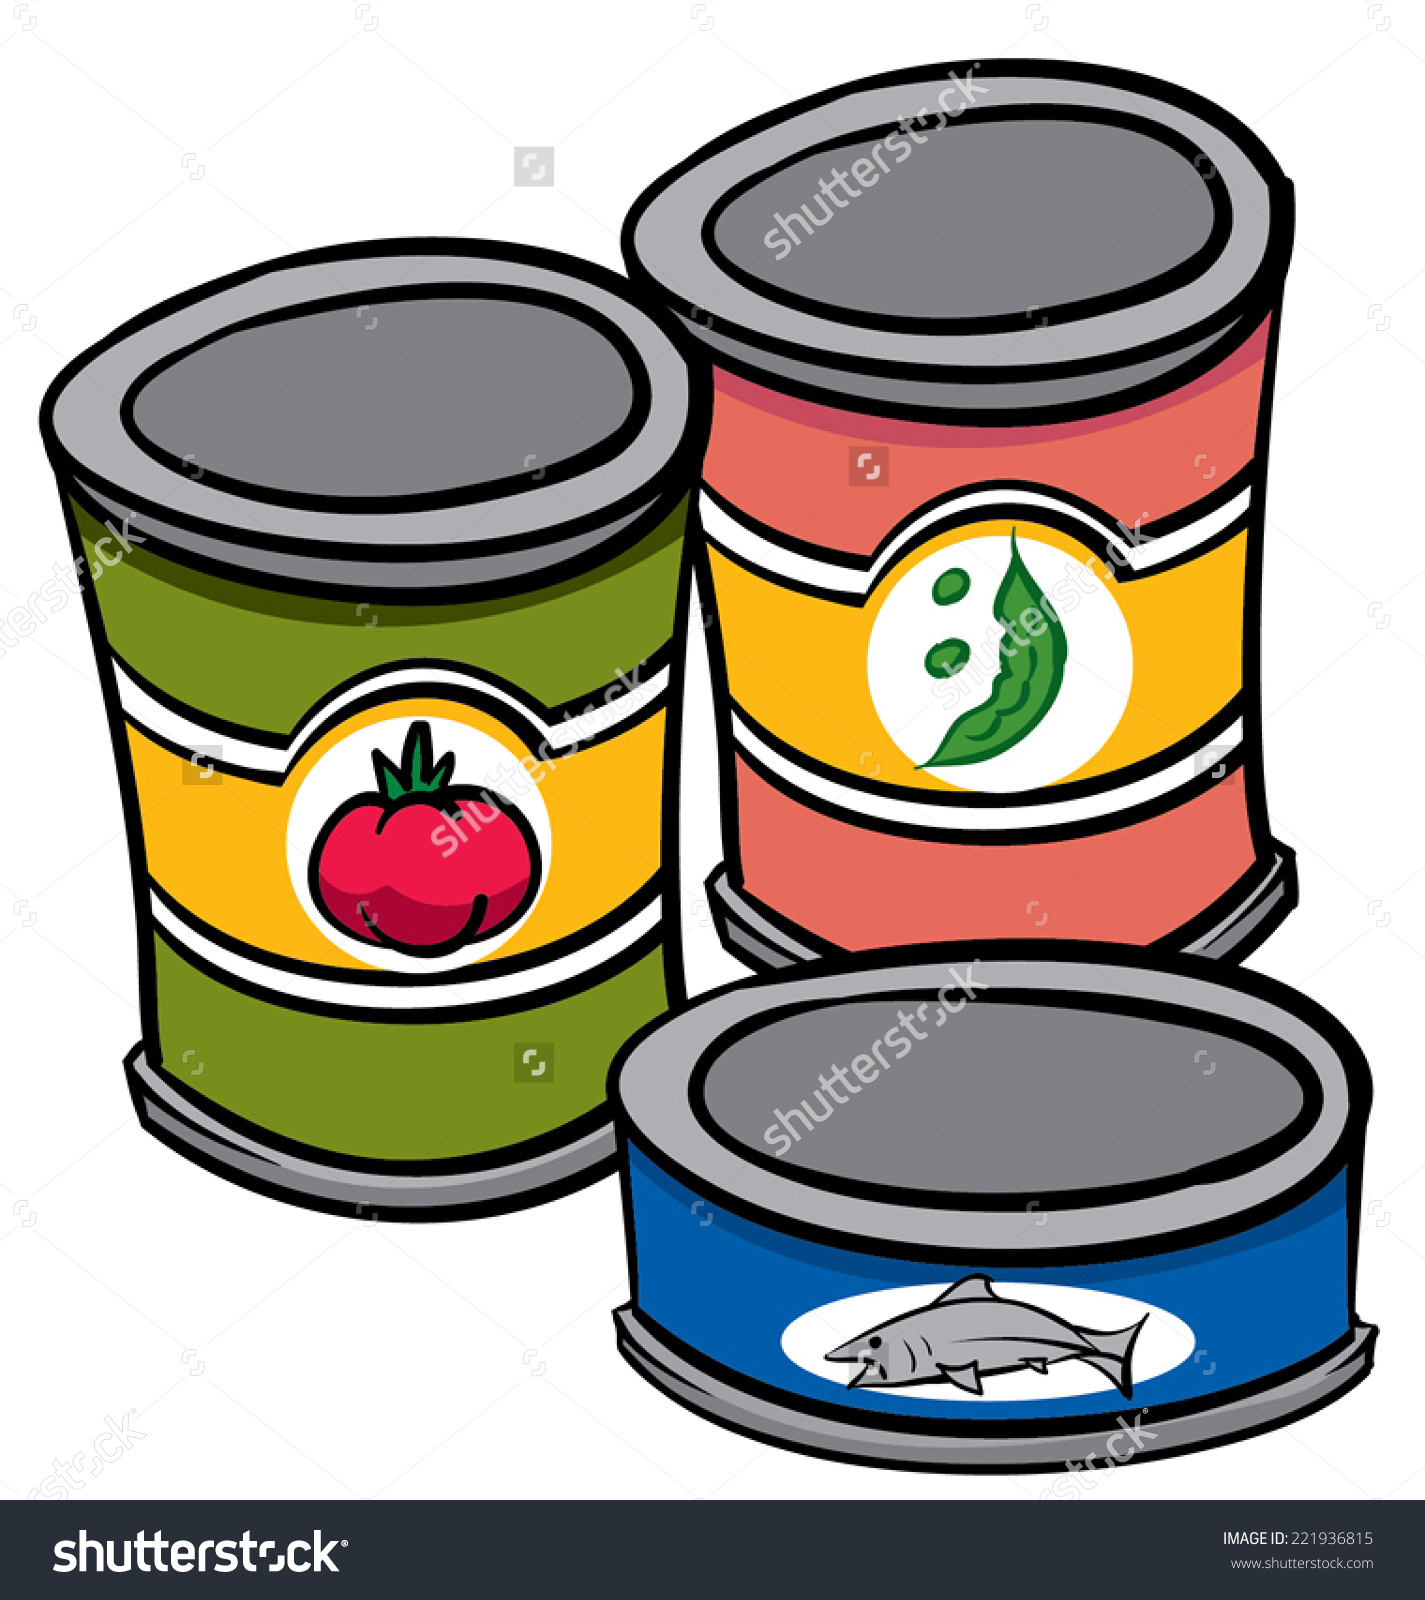 Canned Food Clipart. 52f8c53d - Canned Food Clip Art